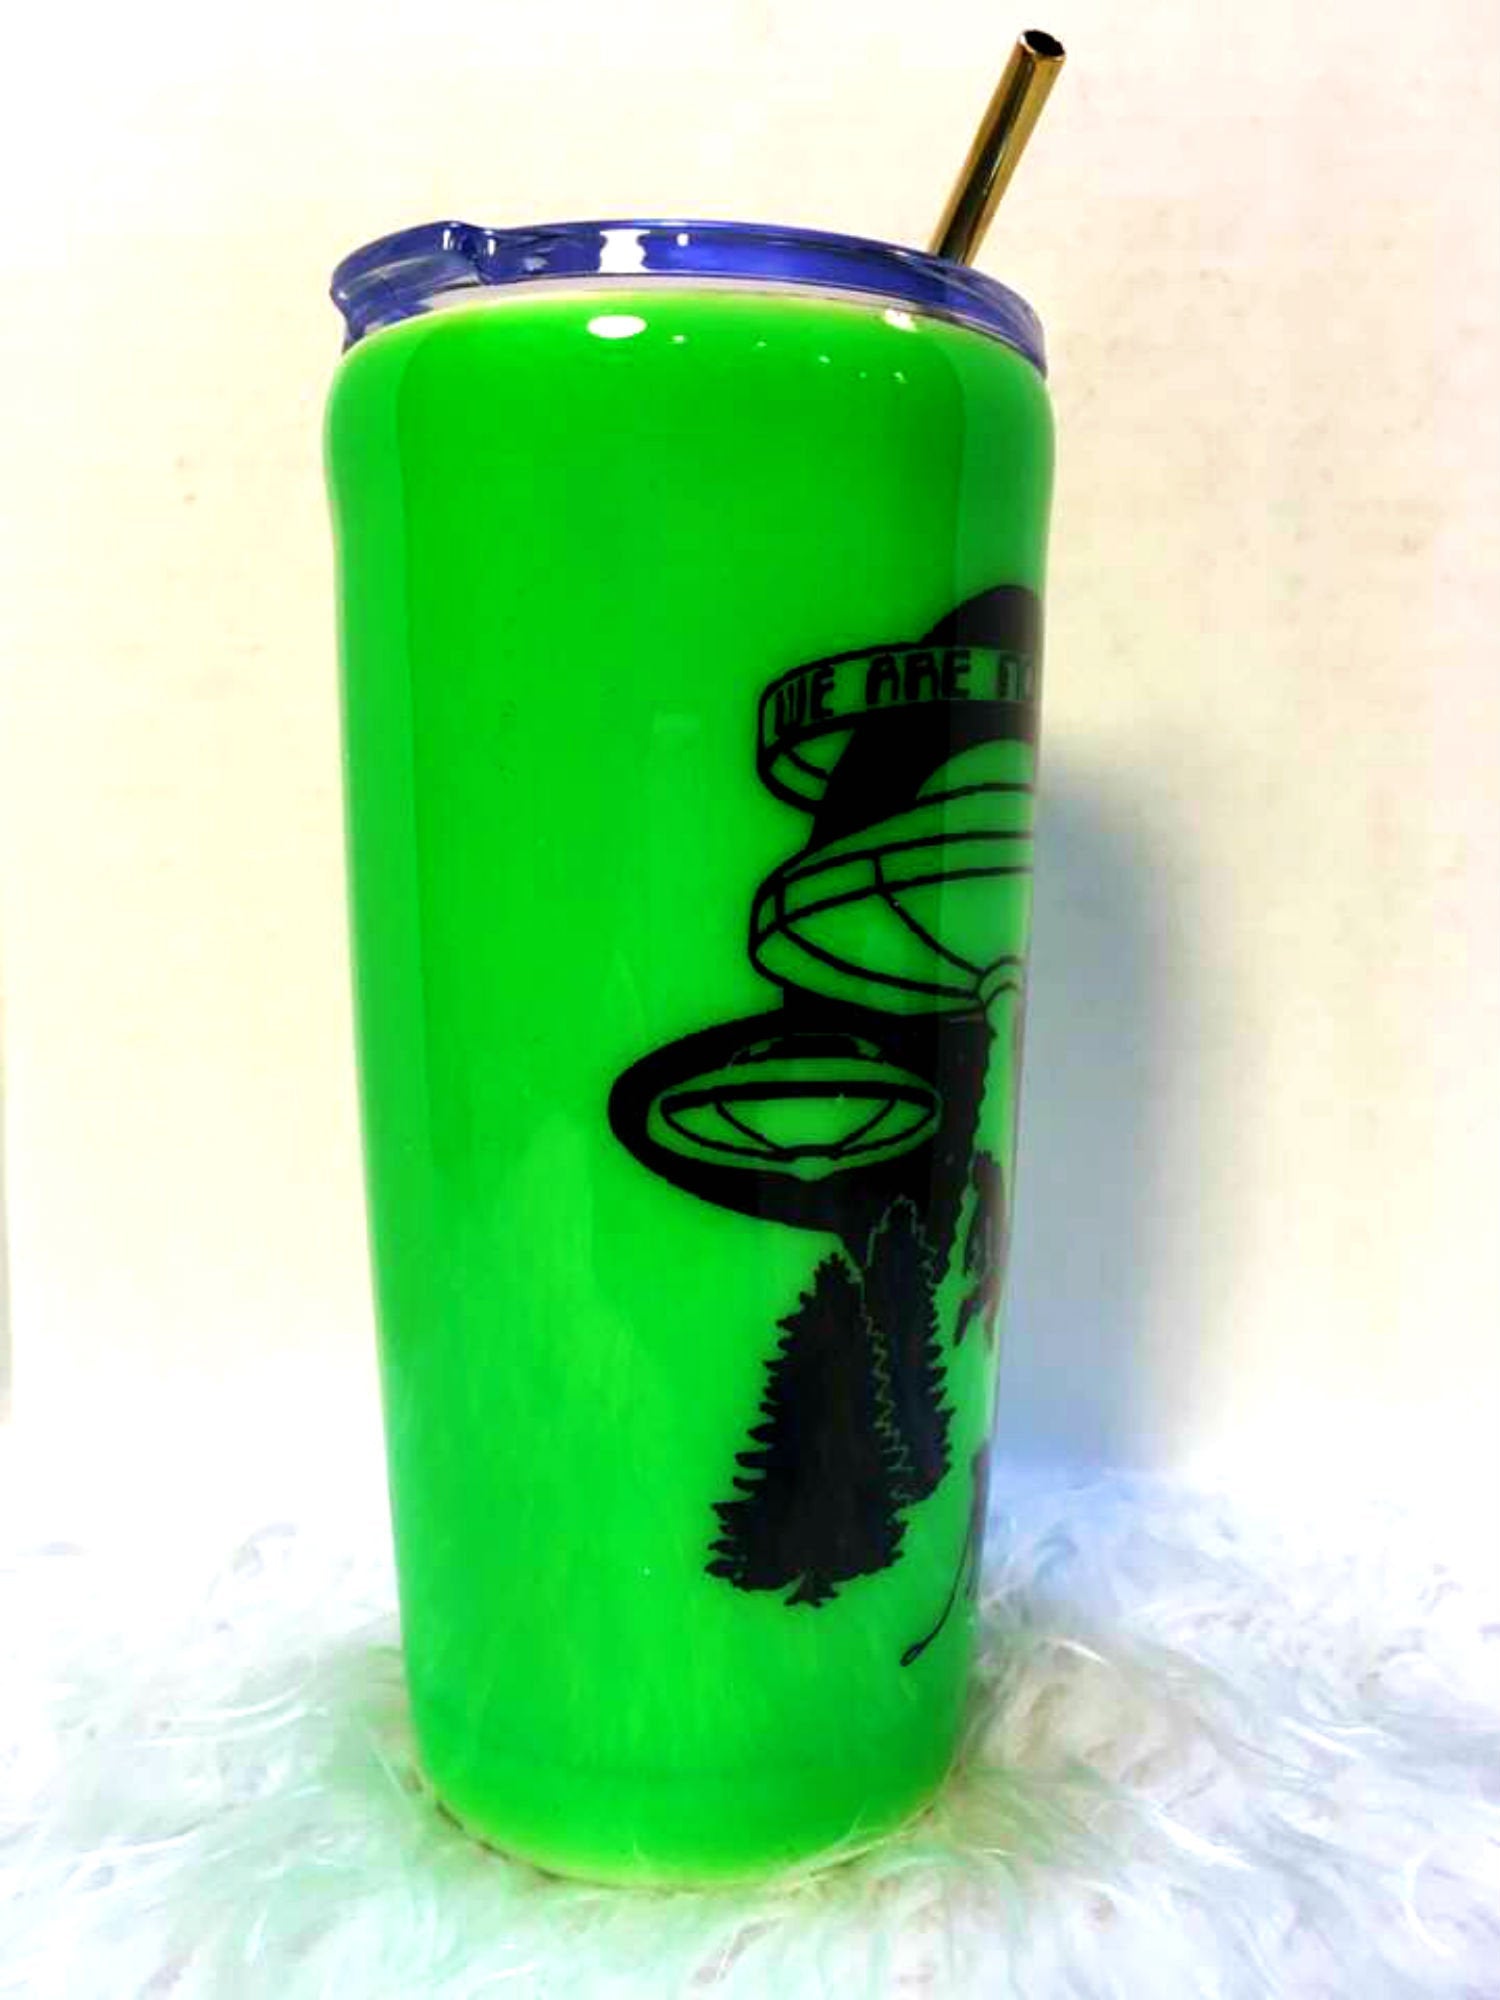 Alien UFO Glow in the Dark Green Tumbler Cup Stainless Steel with